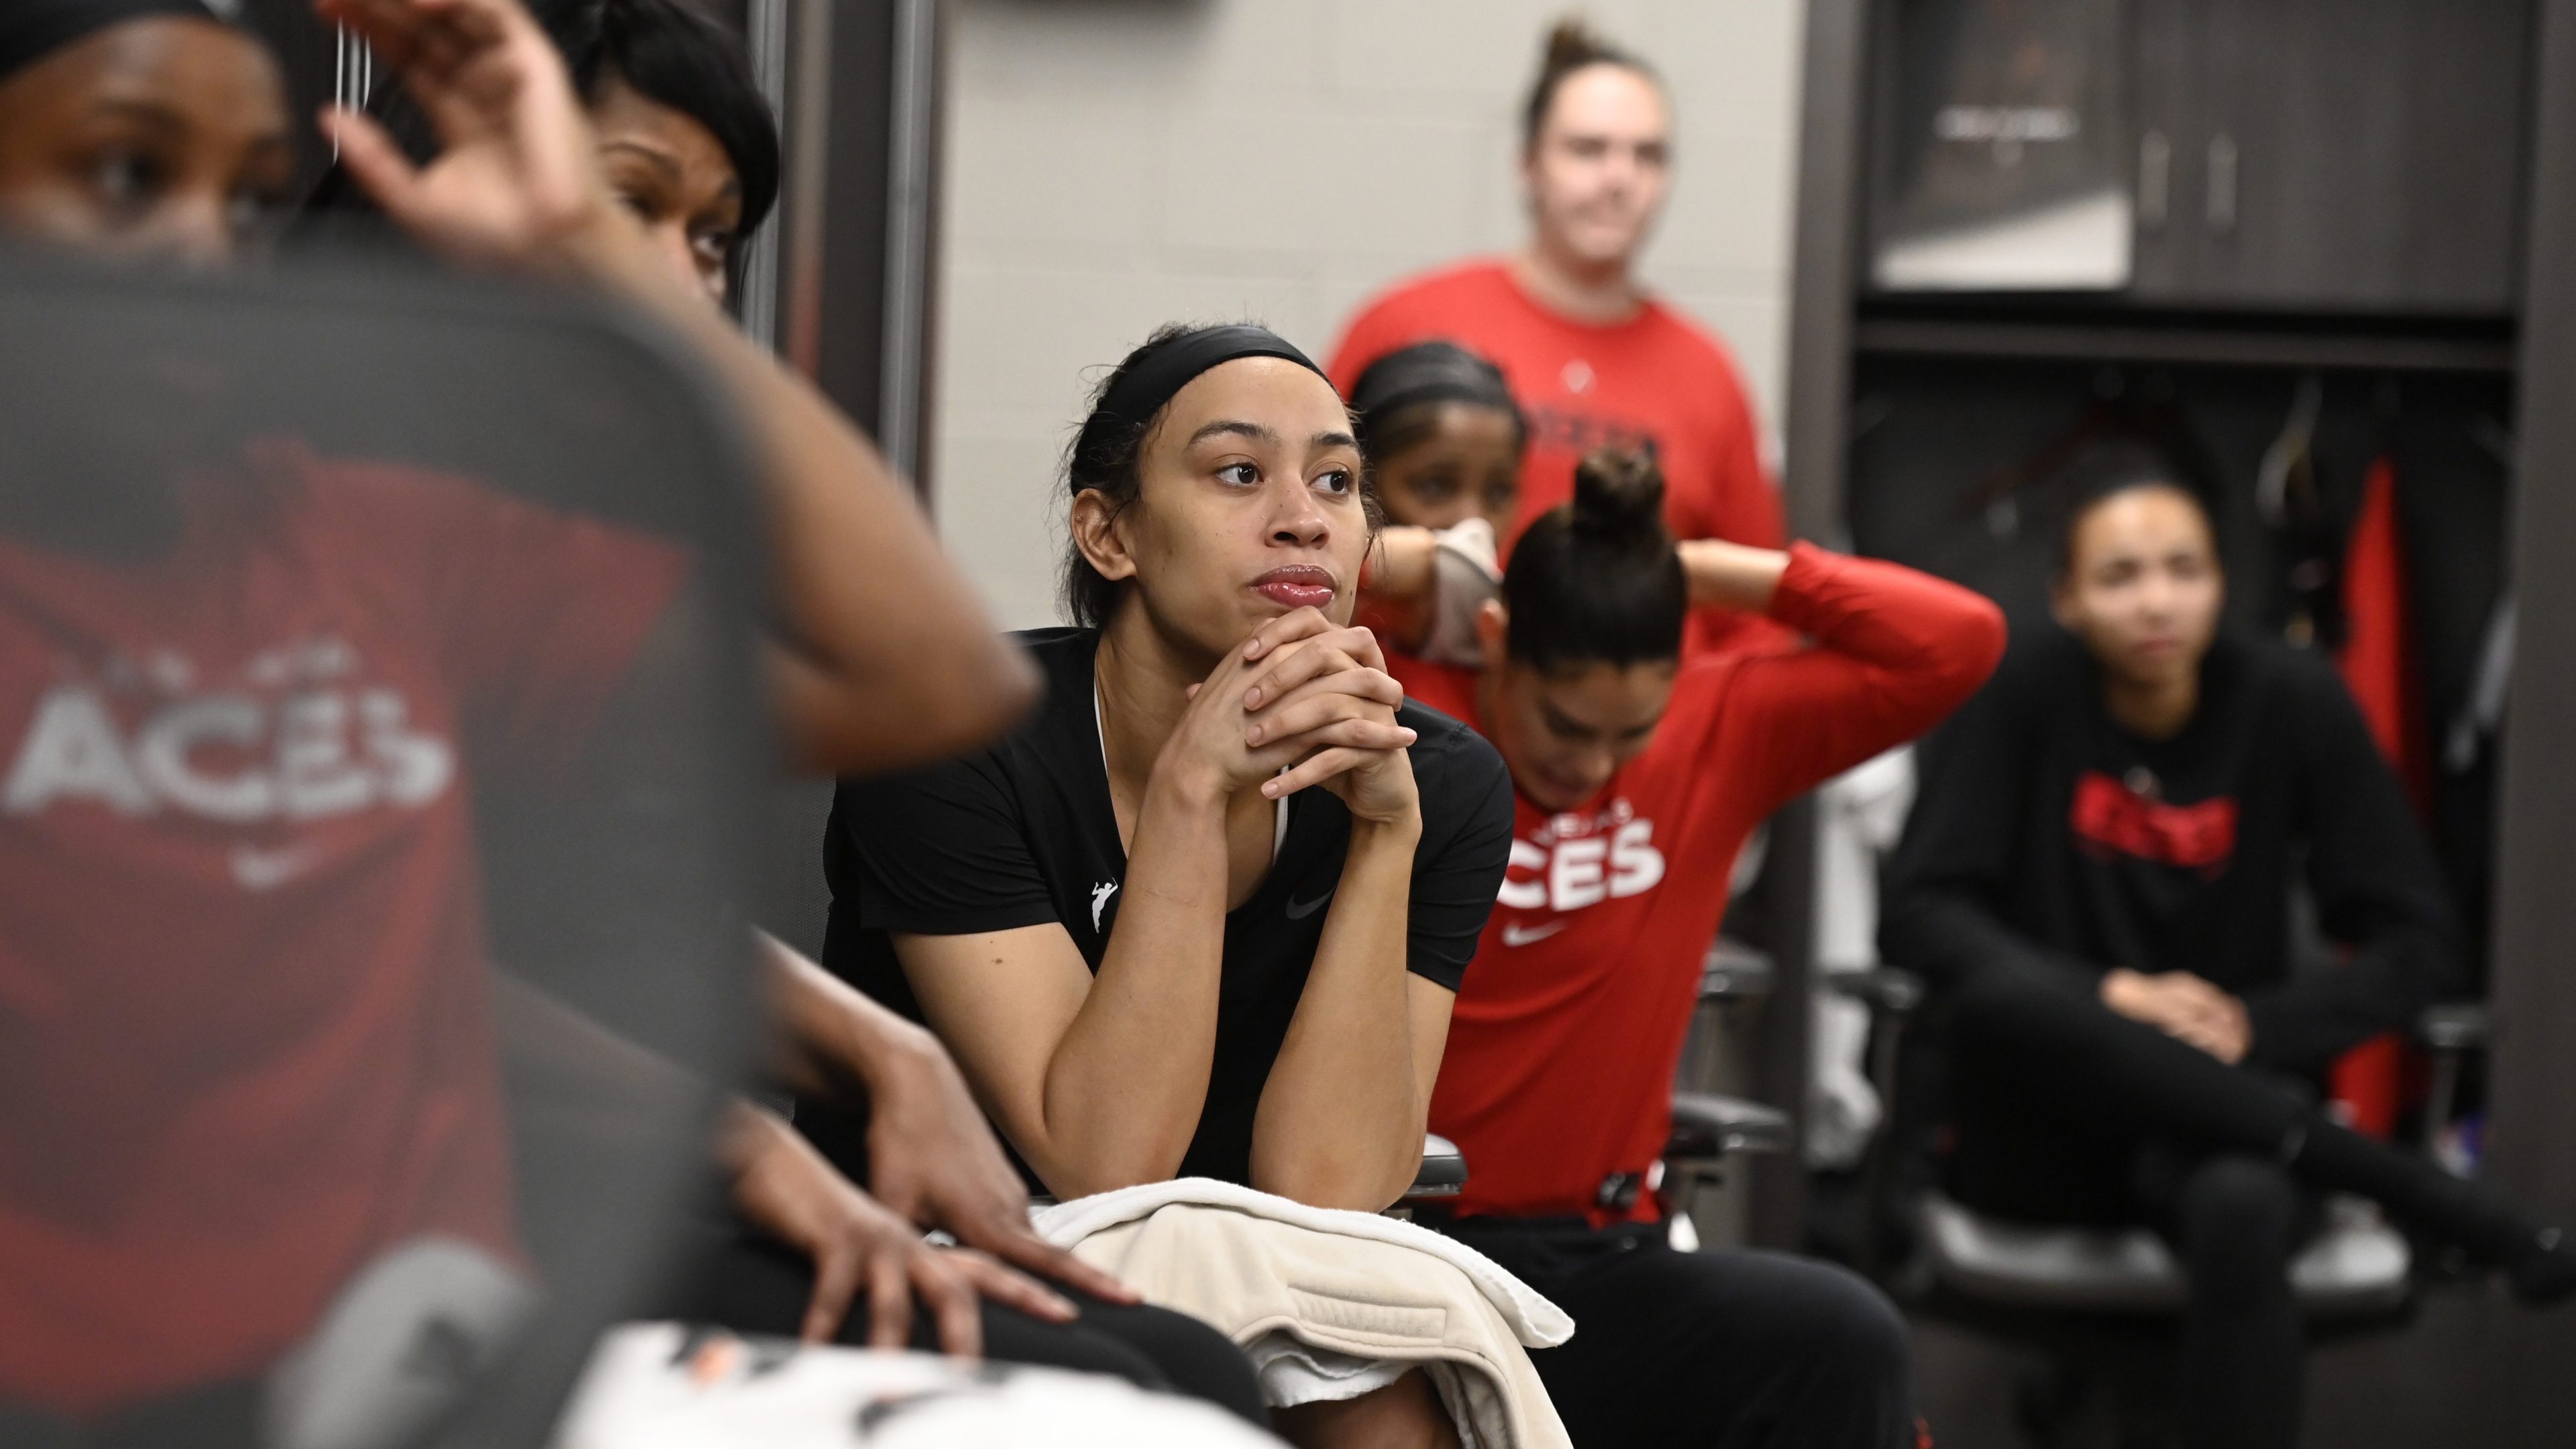 Dearica Hamby #5 of the Las Vegas Aces looks on in the locker room before Game 2 of the 2022 WNBA Finals on September 13, 2022 at Michelob ULTRA Arena in Las Vegas, Nevada.